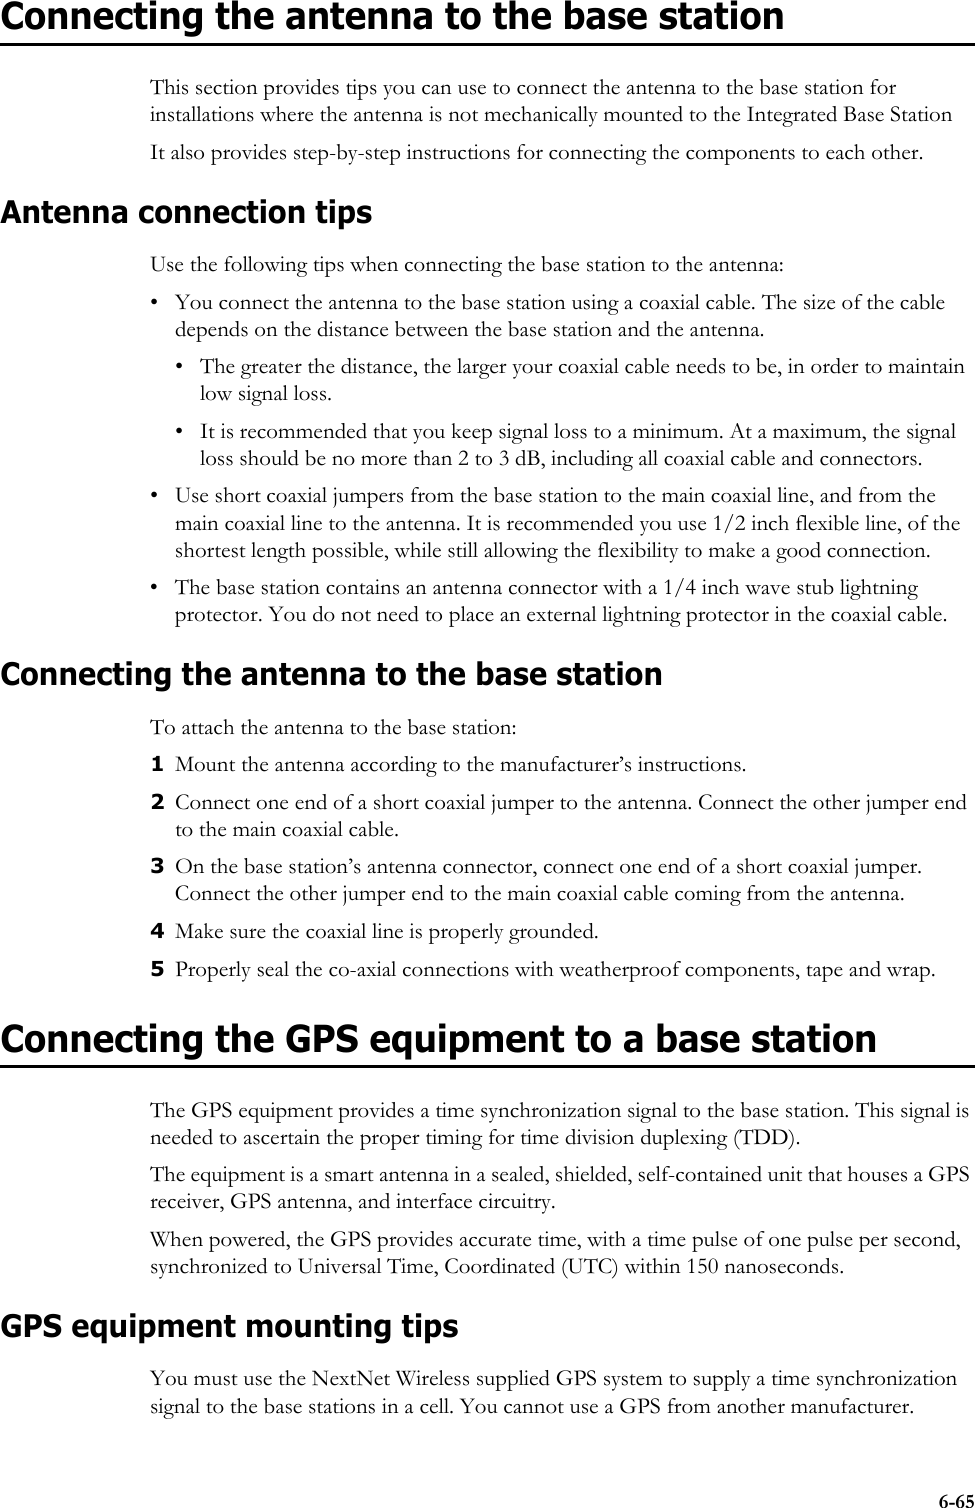 6-65Connecting the antenna to the base stationThis section provides tips you can use to connect the antenna to the base station for installations where the antenna is not mechanically mounted to the Integrated Base StationIt also provides step-by-step instructions for connecting the components to each other.Antenna connection tipsUse the following tips when connecting the base station to the antenna:• You connect the antenna to the base station using a coaxial cable. The size of the cable depends on the distance between the base station and the antenna. • The greater the distance, the larger your coaxial cable needs to be, in order to maintain low signal loss. • It is recommended that you keep signal loss to a minimum. At a maximum, the signal loss should be no more than 2 to 3 dB, including all coaxial cable and connectors.• Use short coaxial jumpers from the base station to the main coaxial line, and from the main coaxial line to the antenna. It is recommended you use 1/2 inch flexible line, of the shortest length possible, while still allowing the flexibility to make a good connection.• The base station contains an antenna connector with a 1/4 inch wave stub lightning protector. You do not need to place an external lightning protector in the coaxial cable. Connecting the antenna to the base stationTo attach the antenna to the base station:1Mount the antenna according to the manufacturer’s instructions. 2Connect one end of a short coaxial jumper to the antenna. Connect the other jumper end to the main coaxial cable.3On the base station’s antenna connector, connect one end of a short coaxial jumper. Connect the other jumper end to the main coaxial cable coming from the antenna.4Make sure the coaxial line is properly grounded.5Properly seal the co-axial connections with weatherproof components, tape and wrap.Connecting the GPS equipment to a base stationThe GPS equipment provides a time synchronization signal to the base station. This signal is needed to ascertain the proper timing for time division duplexing (TDD). The equipment is a smart antenna in a sealed, shielded, self-contained unit that houses a GPS receiver, GPS antenna, and interface circuitry. When powered, the GPS provides accurate time, with a time pulse of one pulse per second, synchronized to Universal Time, Coordinated (UTC) within 150 nanoseconds. GPS equipment mounting tipsYou must use the NextNet Wireless supplied GPS system to supply a time synchronization signal to the base stations in a cell. You cannot use a GPS from another manufacturer. 